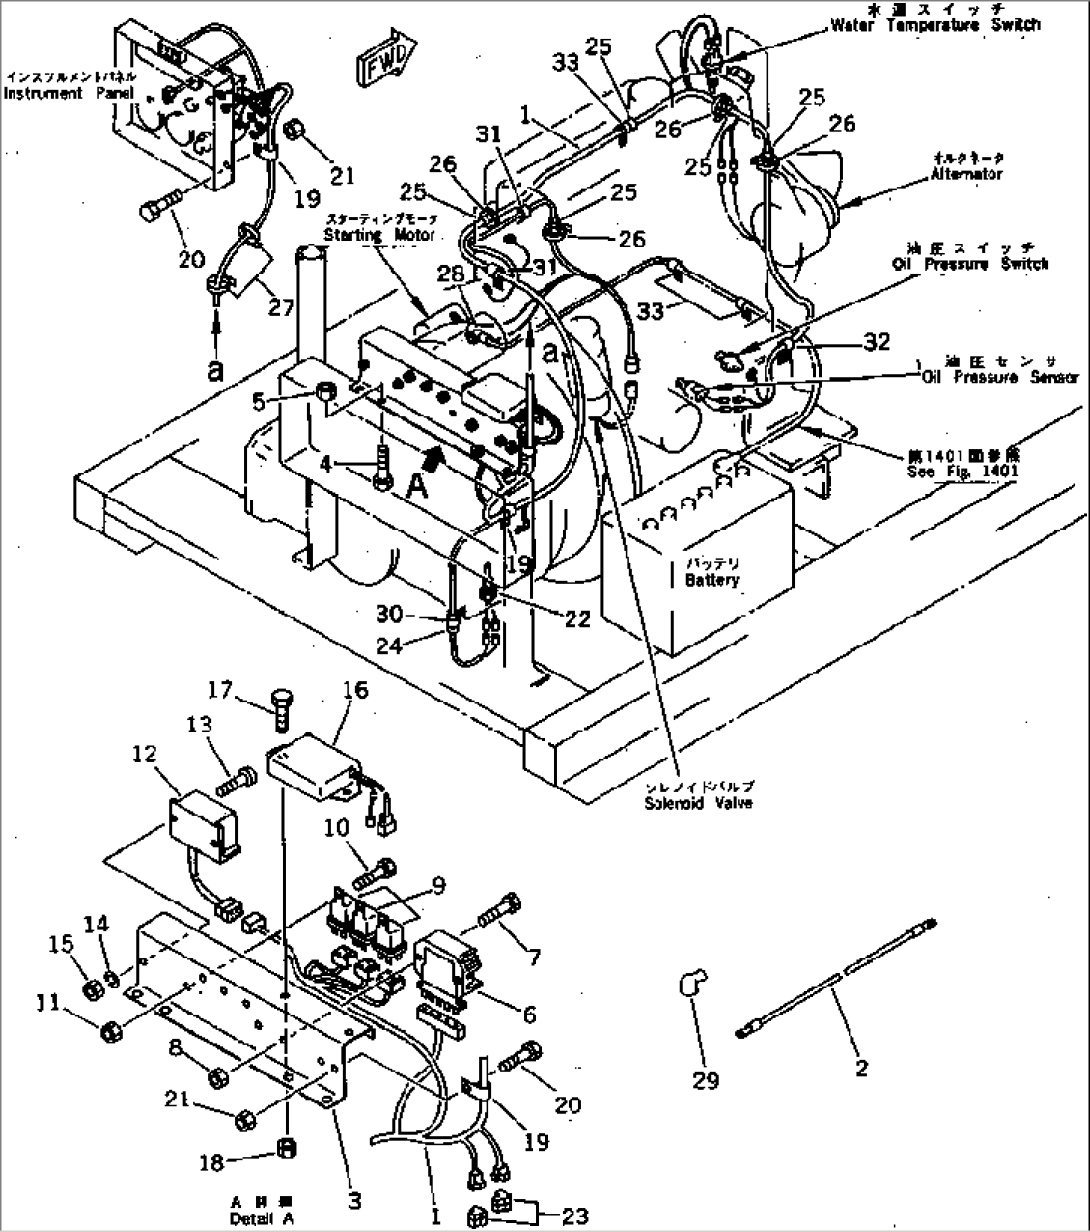 ELECTRICAL SYSTEM